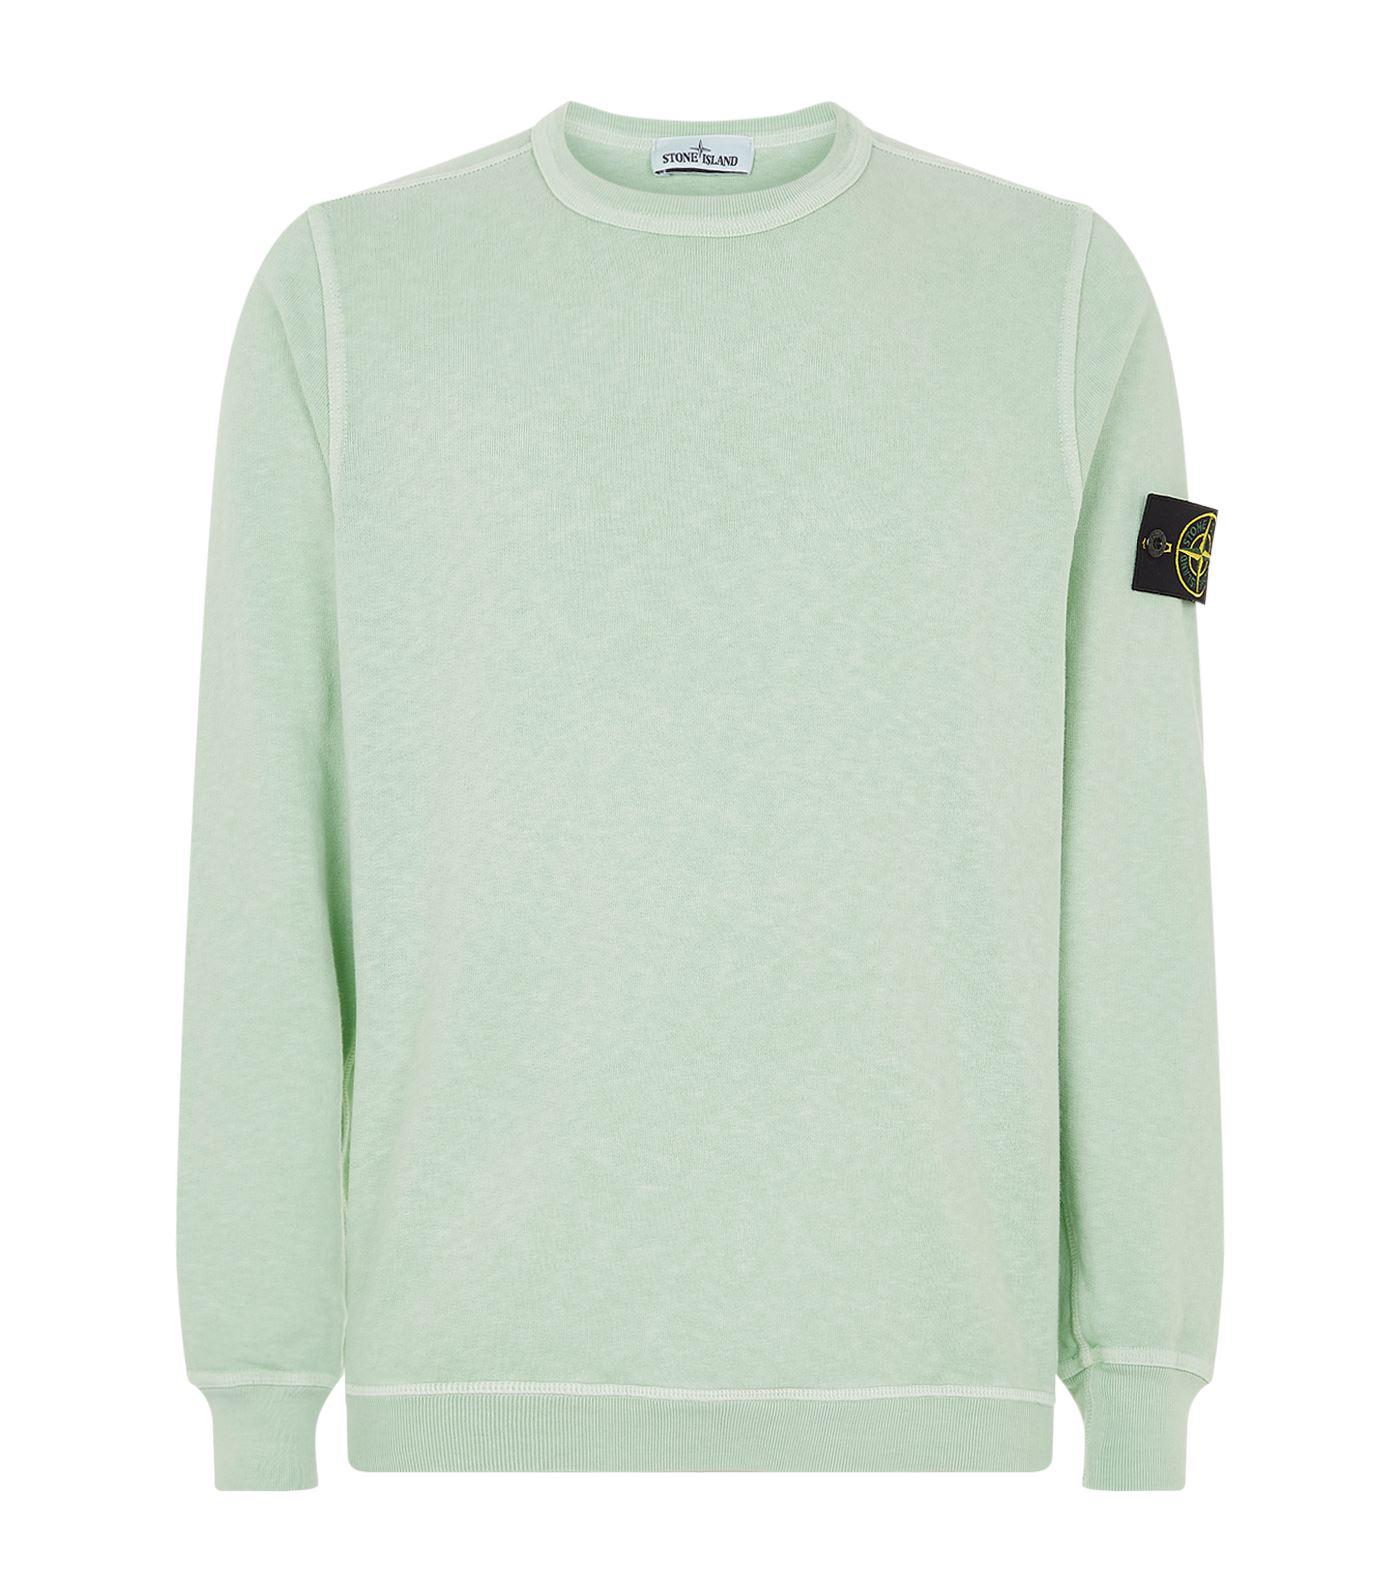 Stone Island Cotton Washed Sweater in Green for Men - Lyst